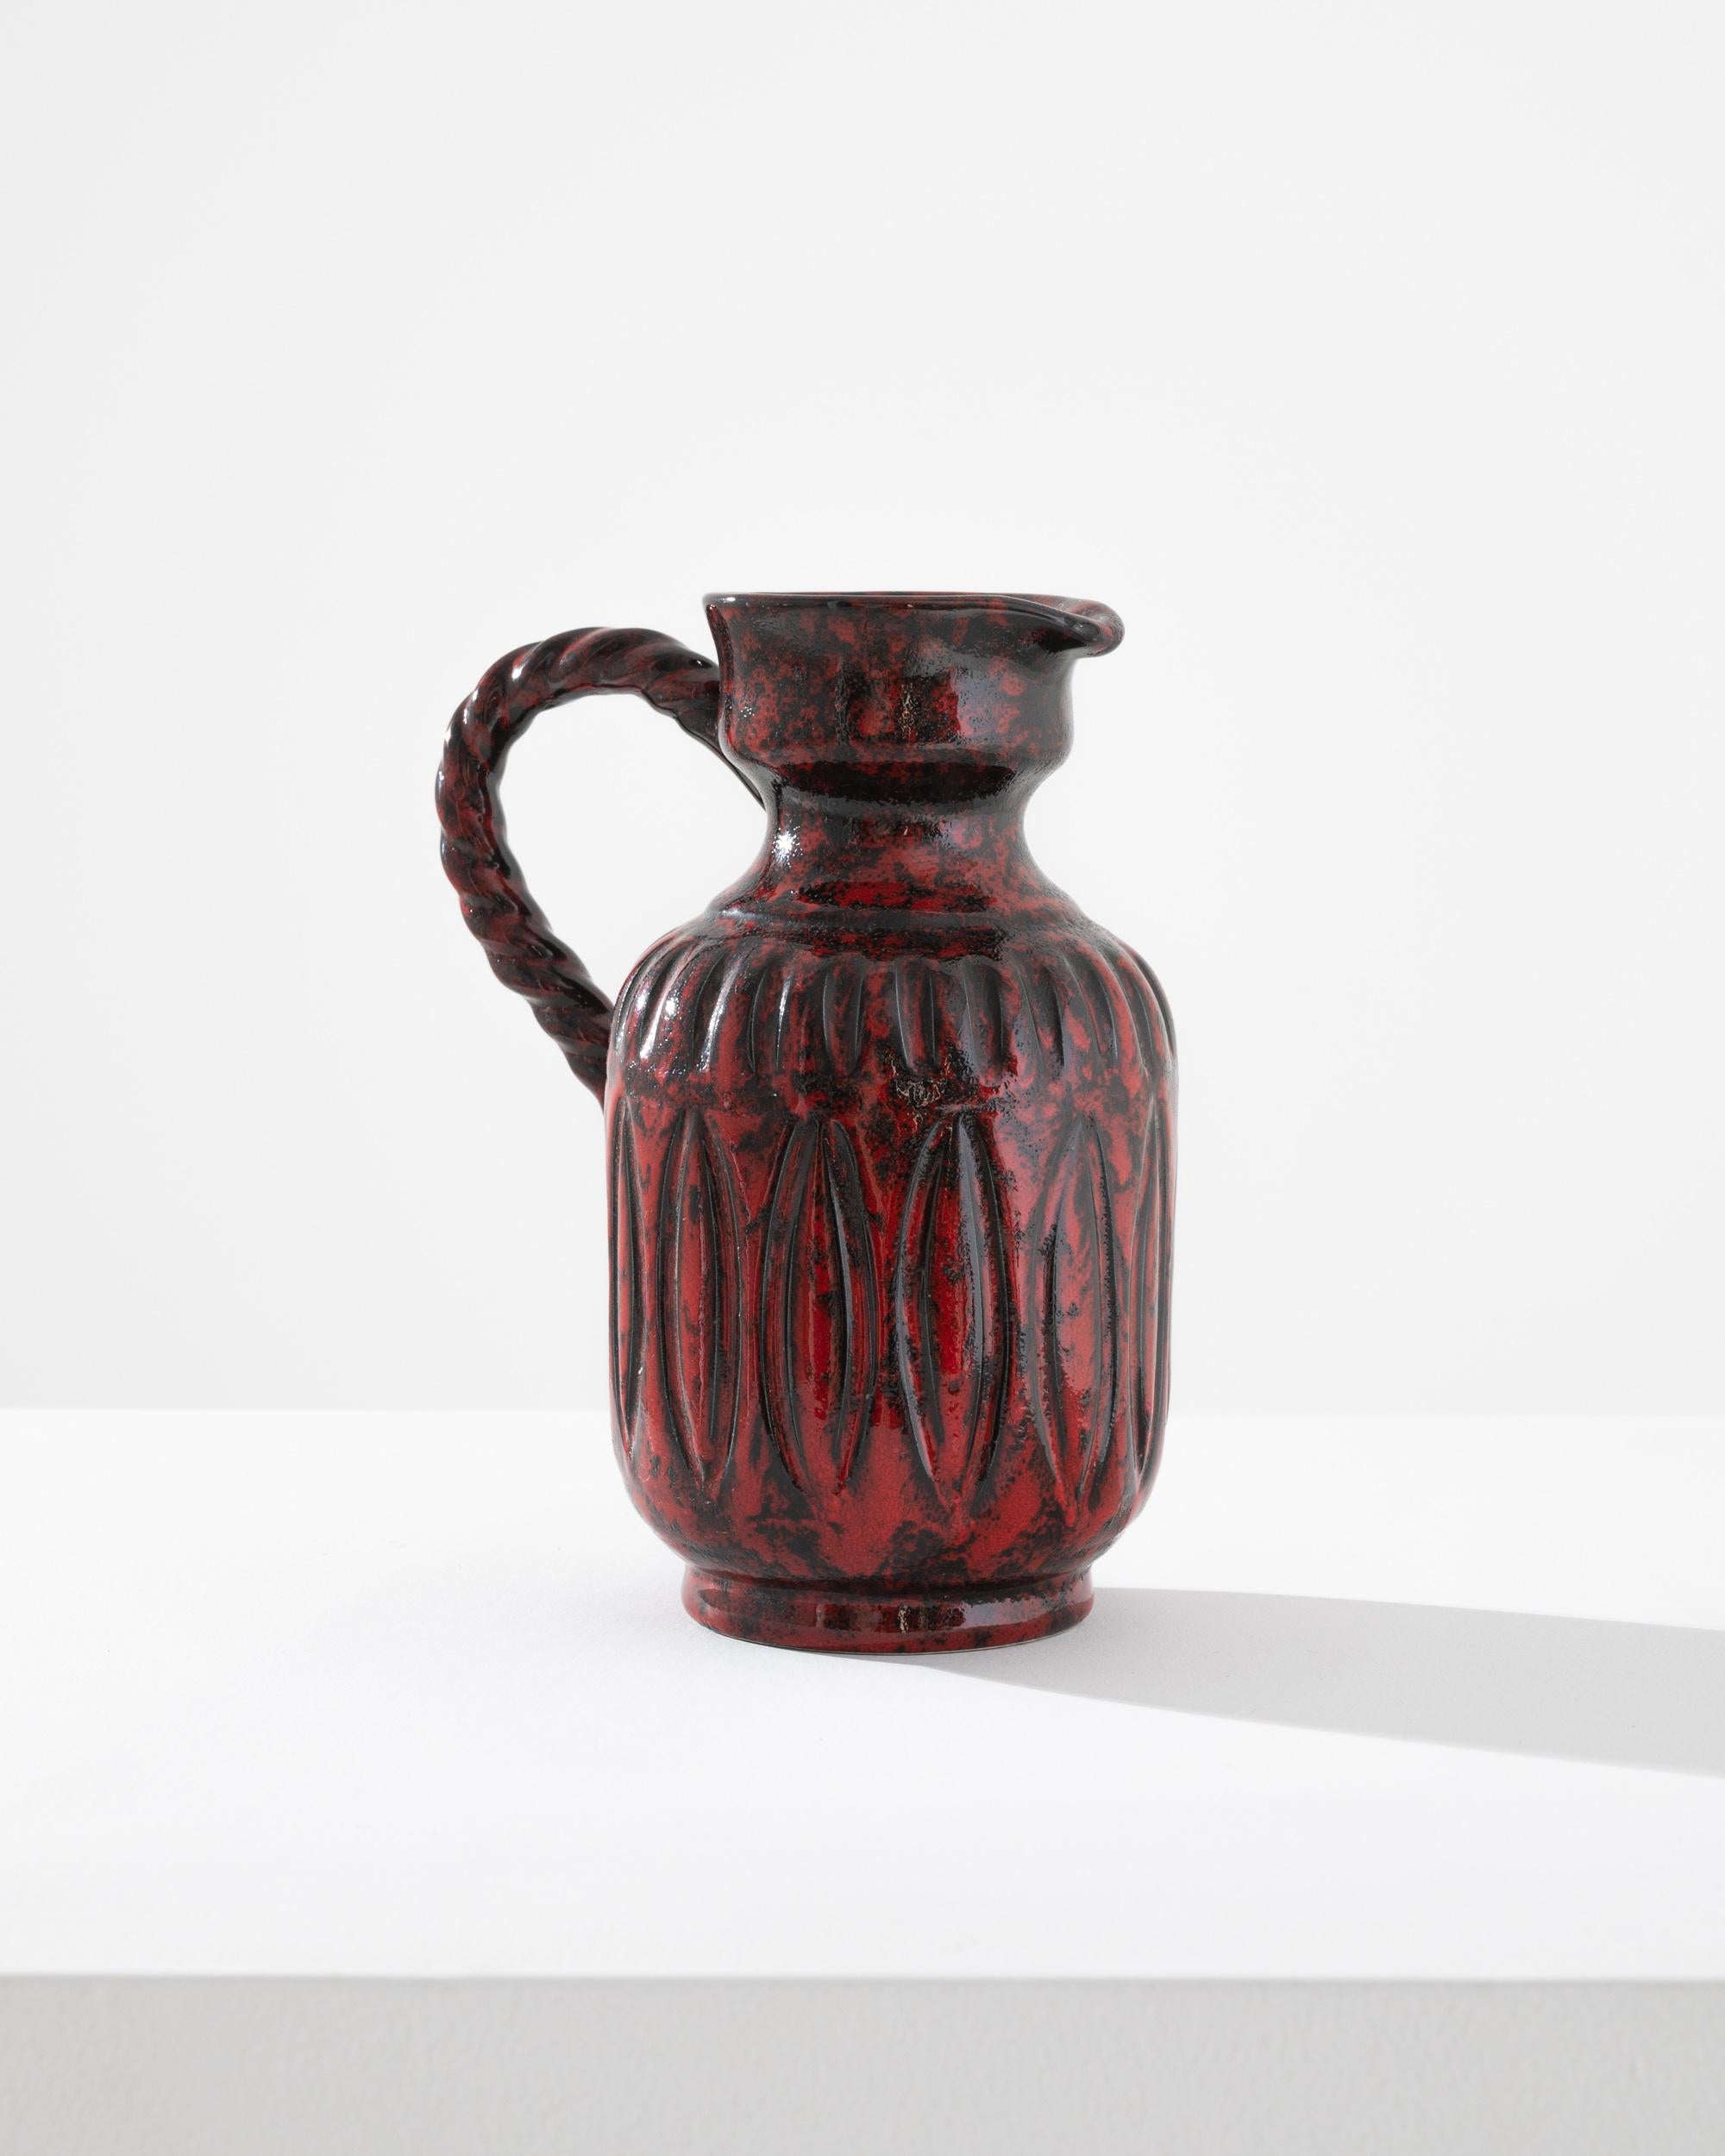 A vintage ceramic vase produced in Germany circa 1960, this pitcher displays all the emblematic qualities of the West Germany style, a unique regional trend. Exhibiting a thick volcanic glaze layered over graphic pressed patterns, the surface shines